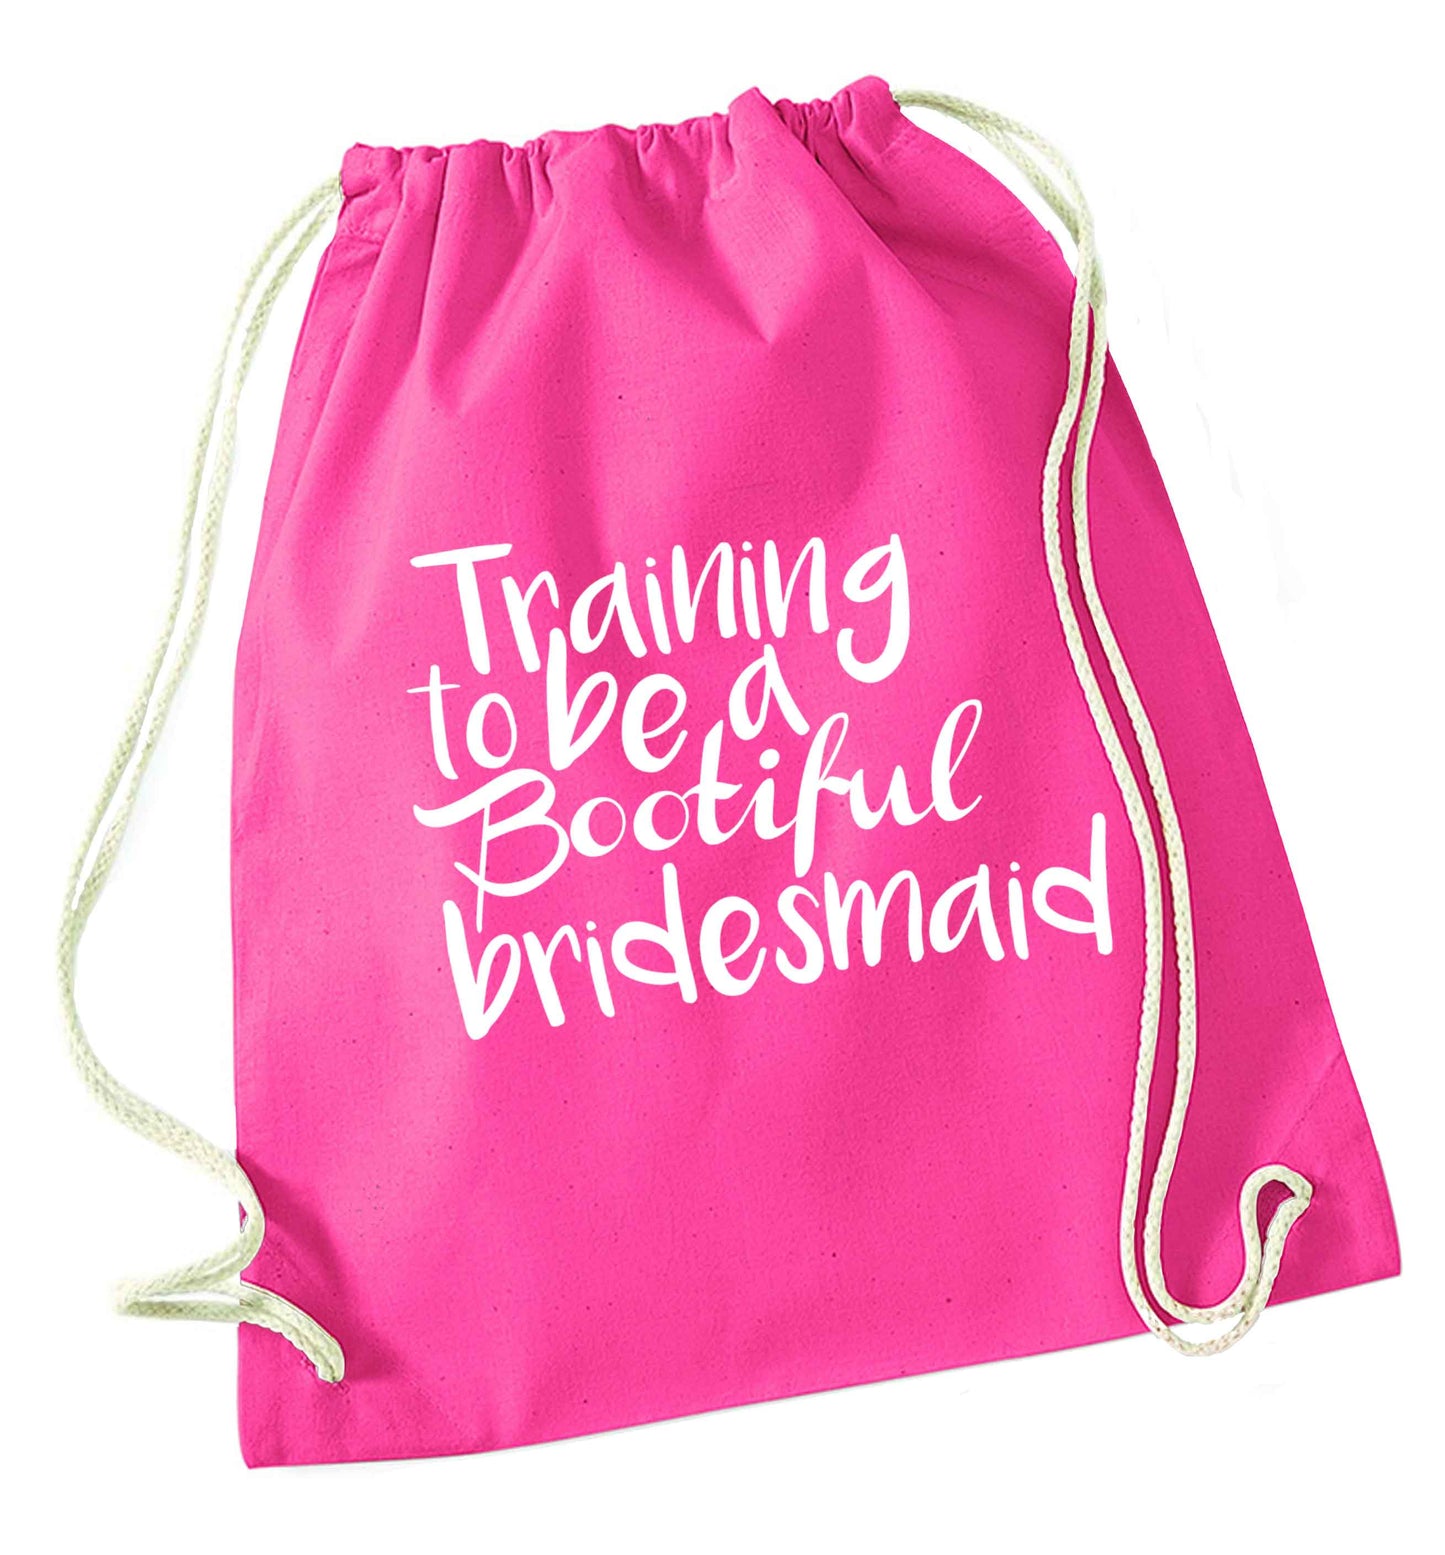 Get motivated and get fit for your big day! Our workout quotes and designs will get you ready to sweat! Perfect for any bride, groom or bridesmaid to be!  pink drawstring bag